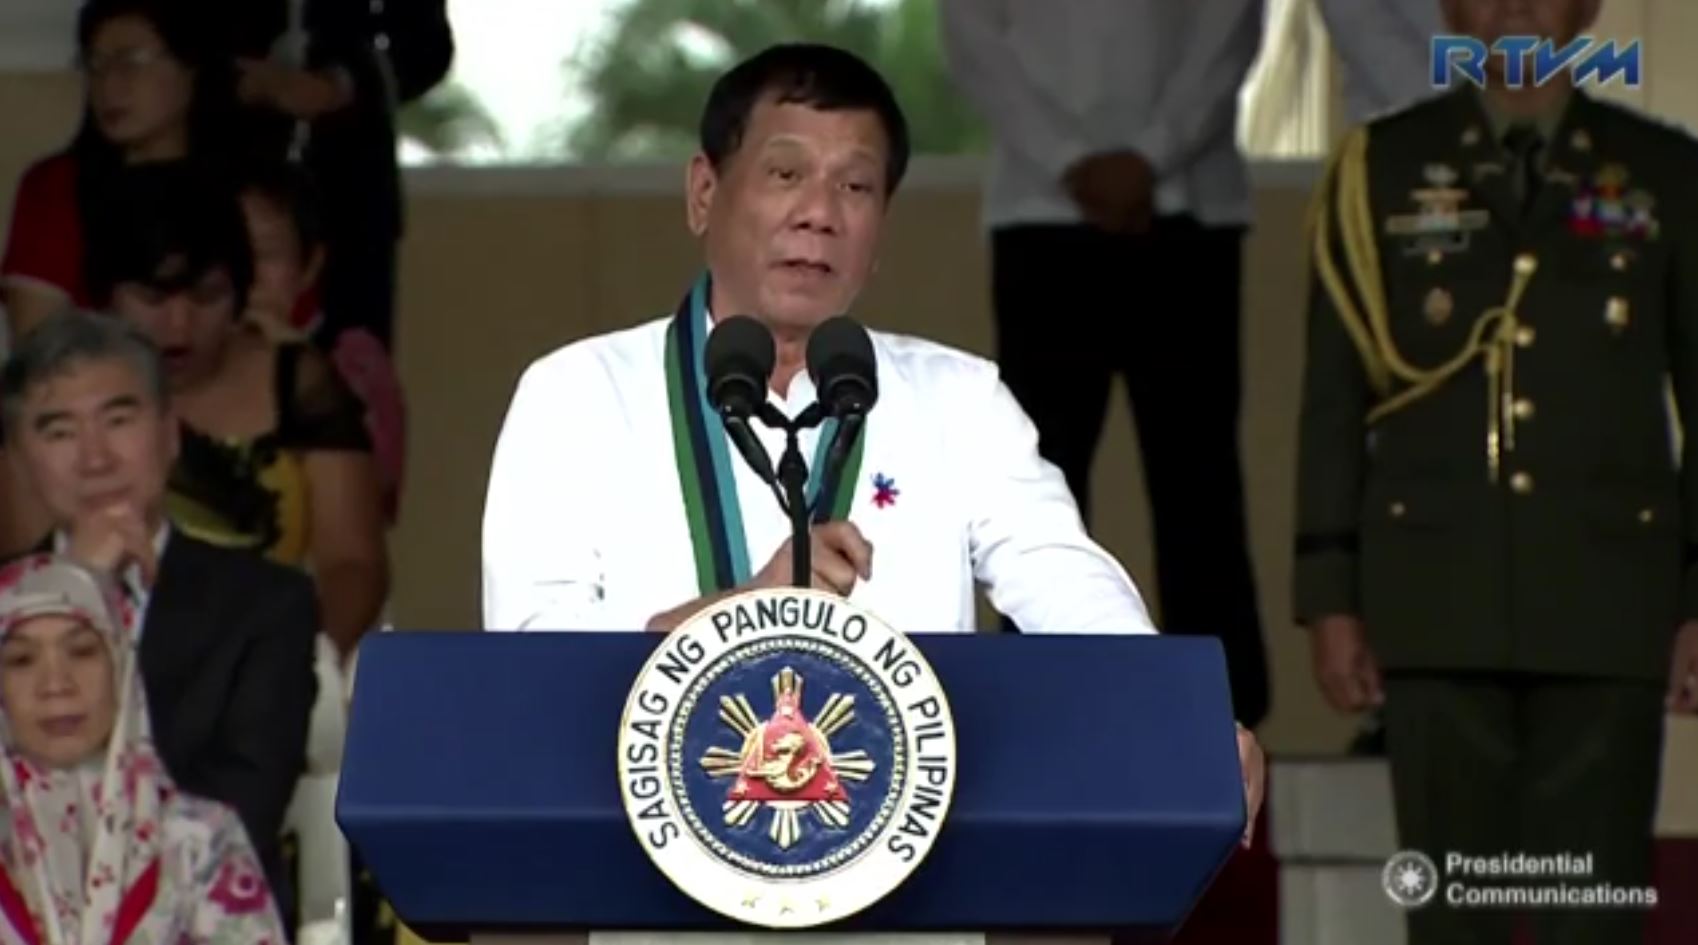 President Rodrigo Duterte speaking during the turn-over ceemonies for the new Armed Forces chief of staff. (Photo grabbed from RTVM video)